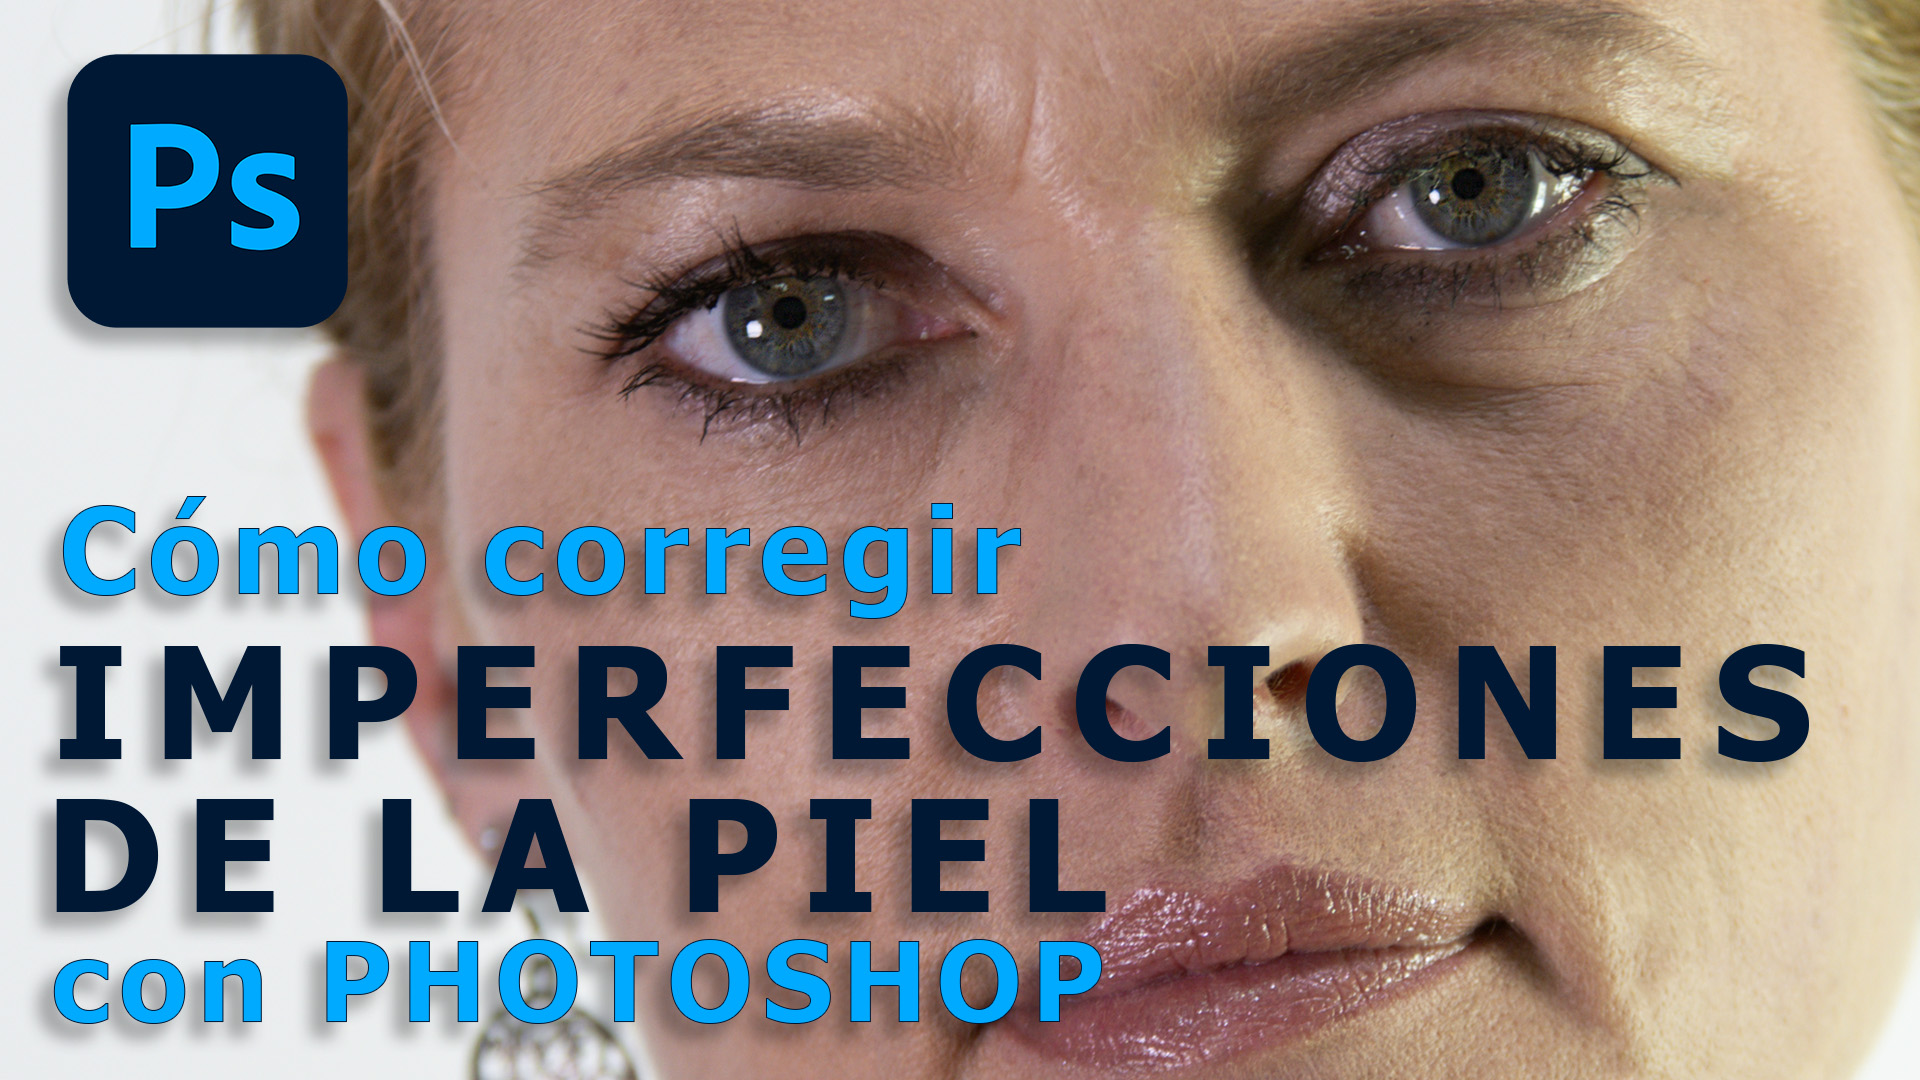 Correct skin imperfections in your portraits